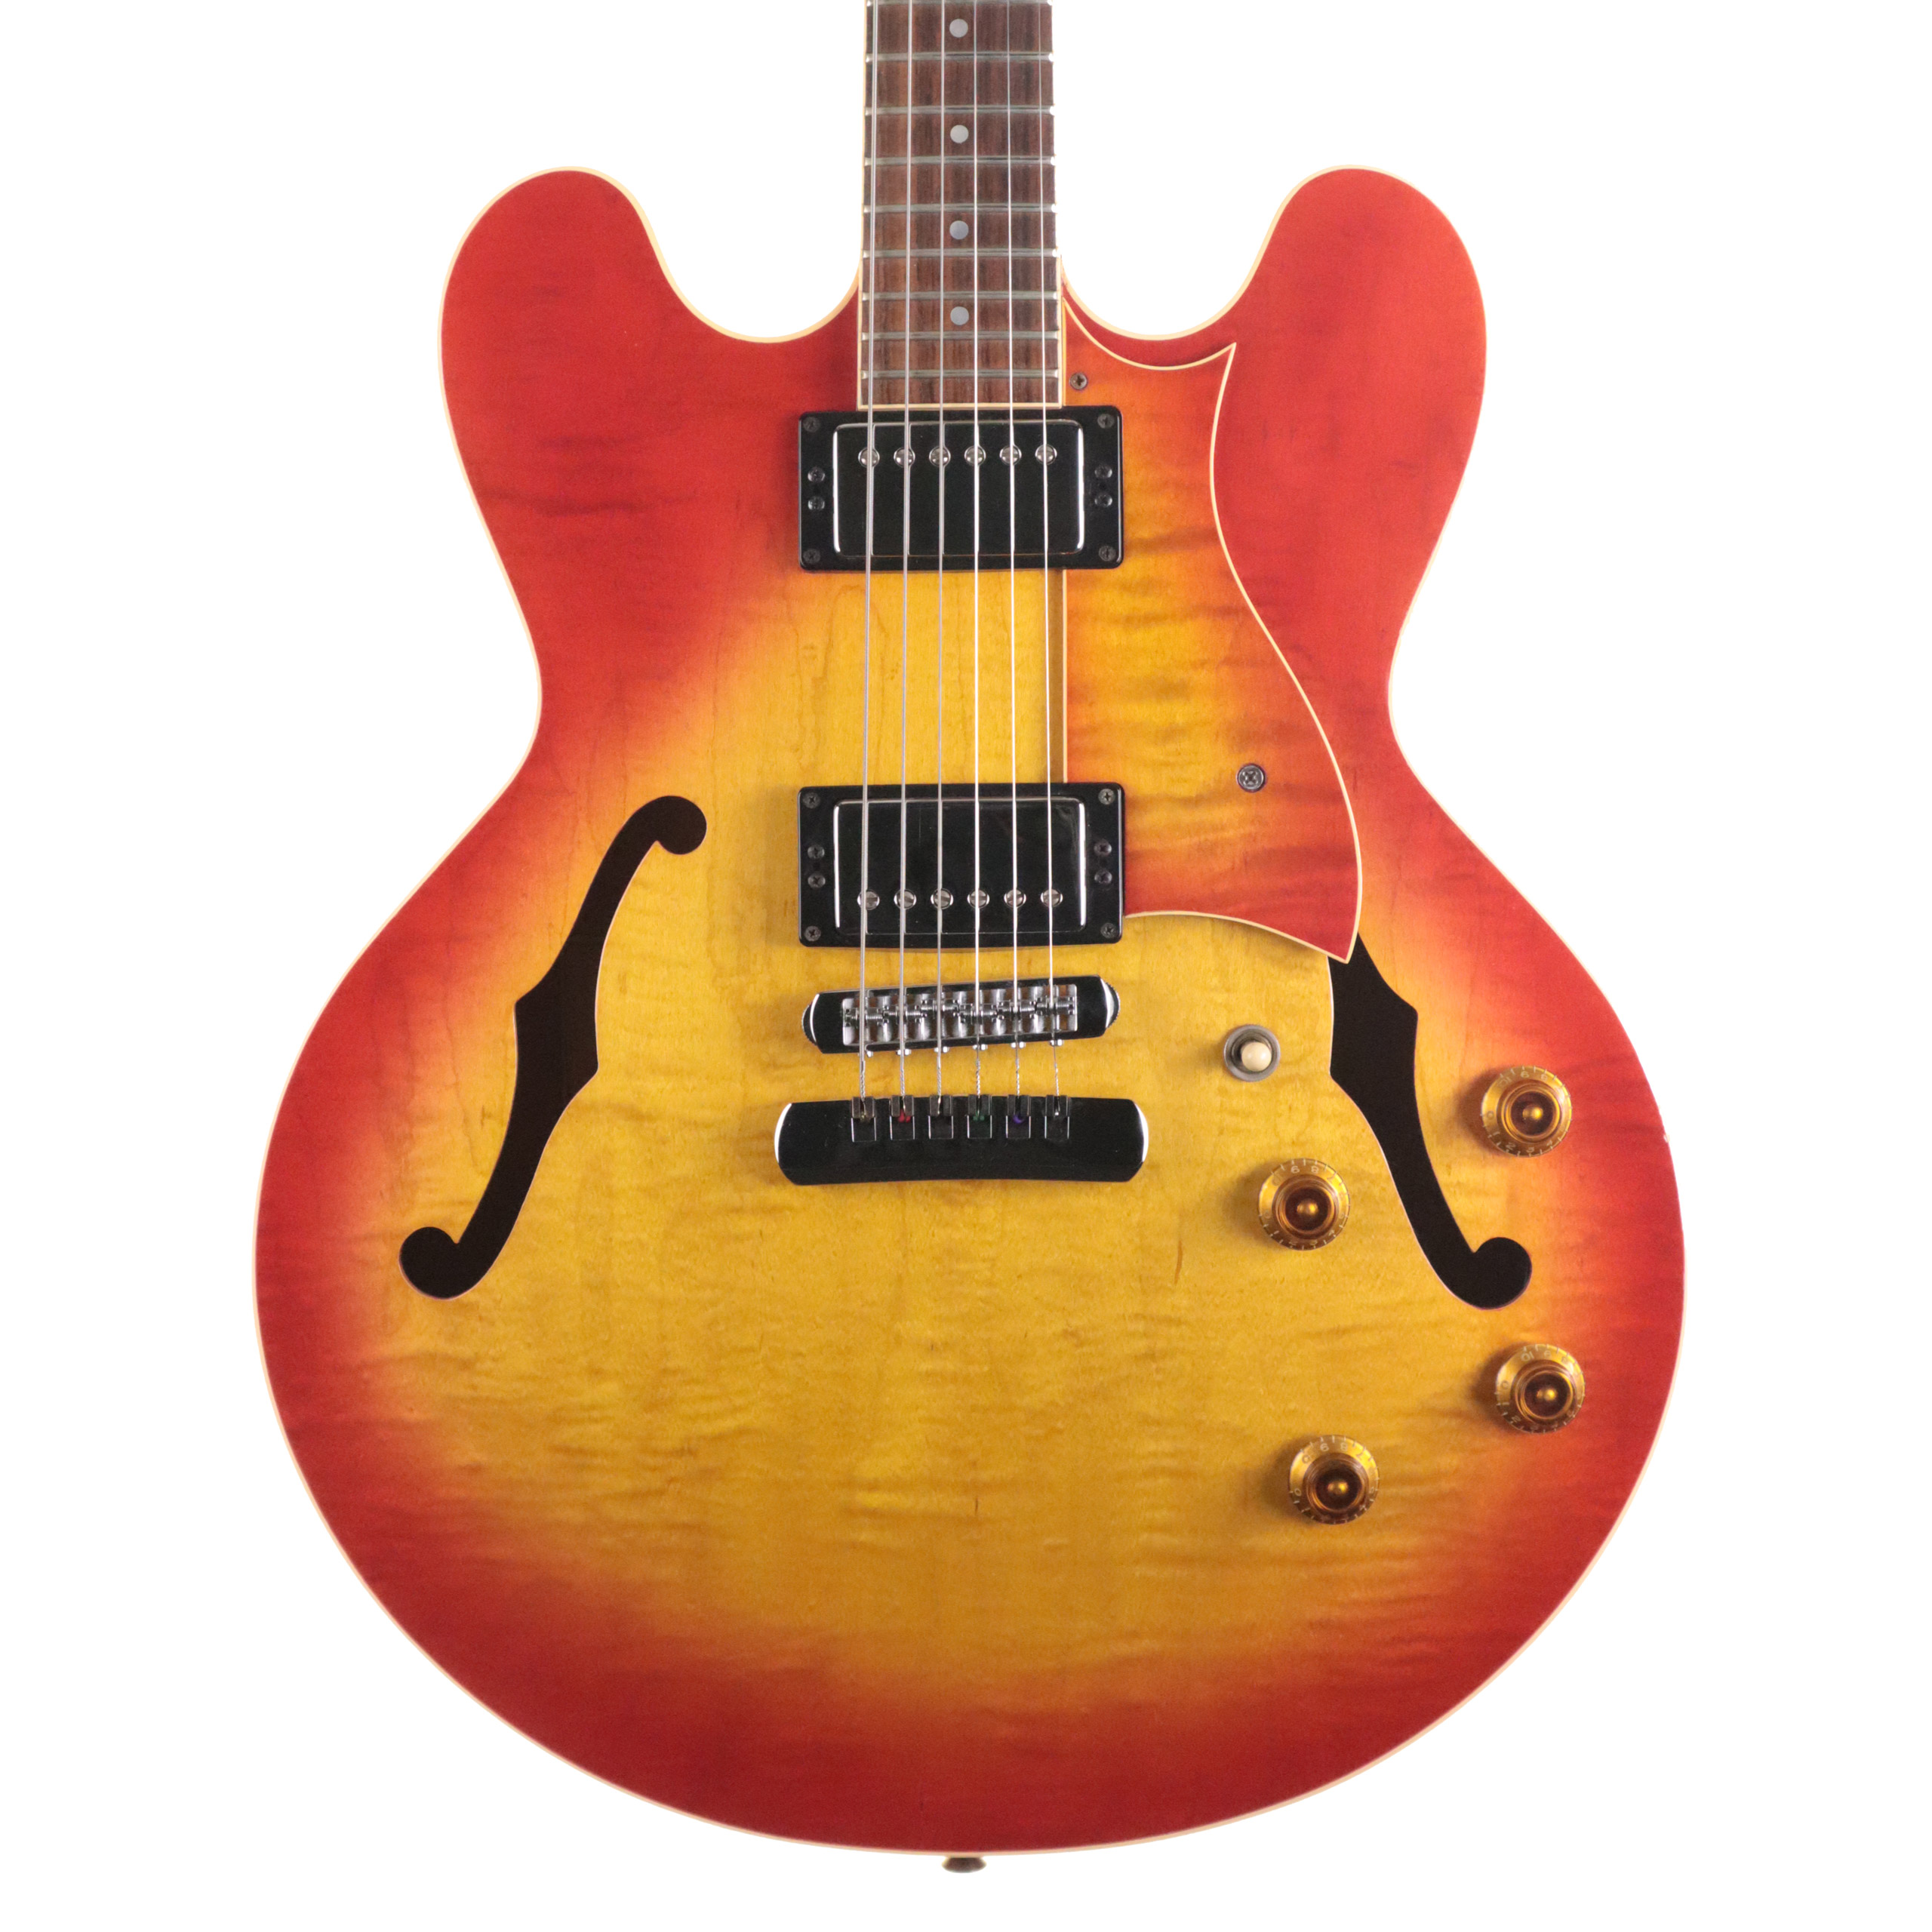 Heritage H-535 ACB Aged Cherry Sunburst Electric Guitar (Pre-Owned)